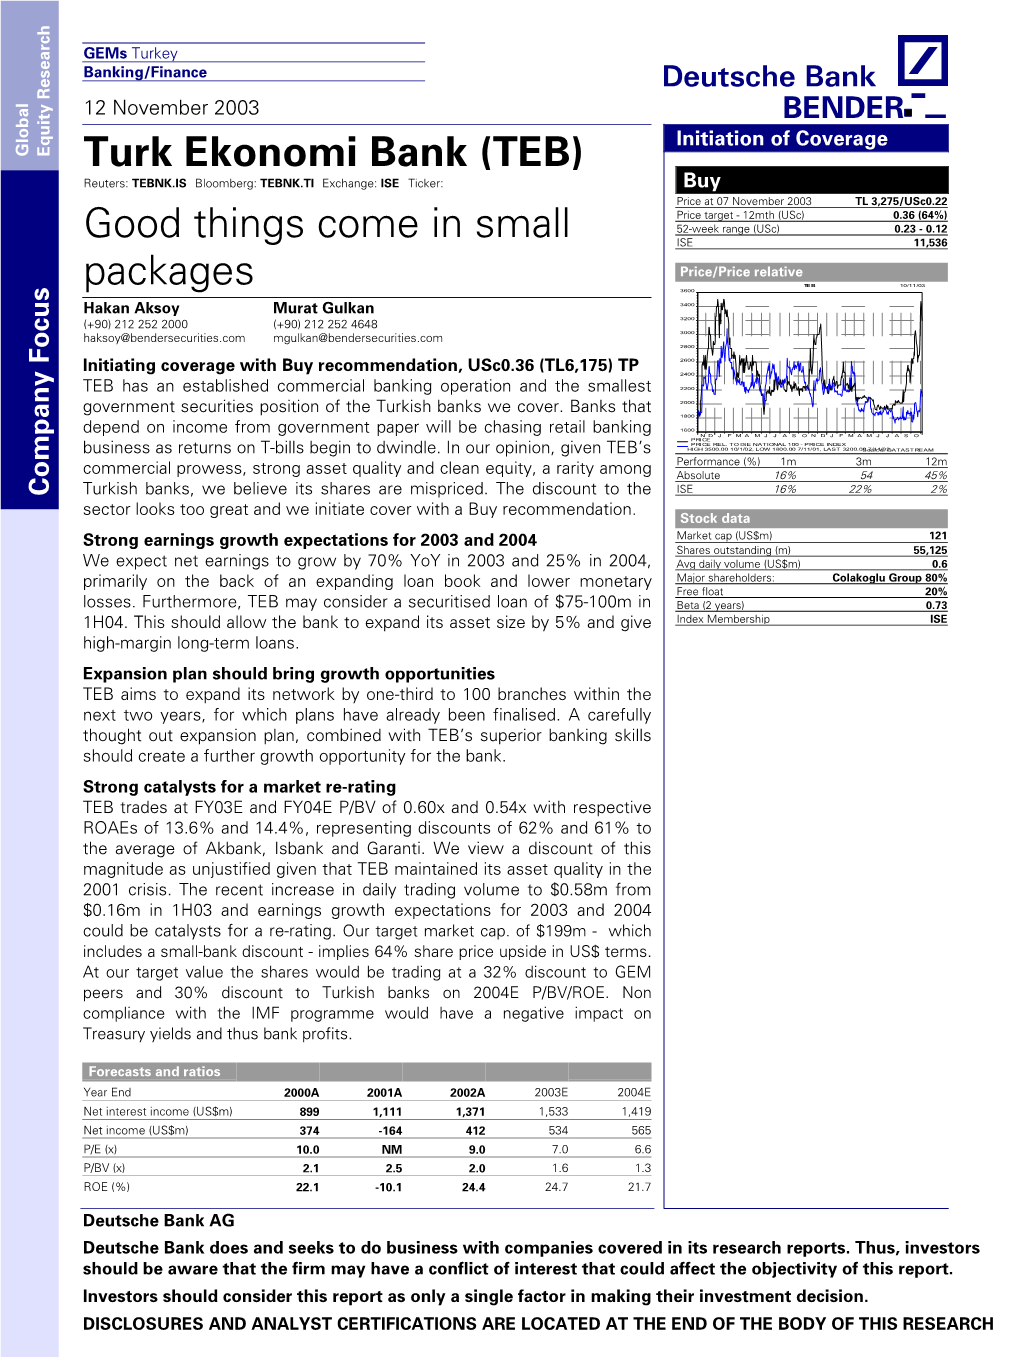 Turk Ekonomi Bank (TEB) Good Things Come in Small Packages